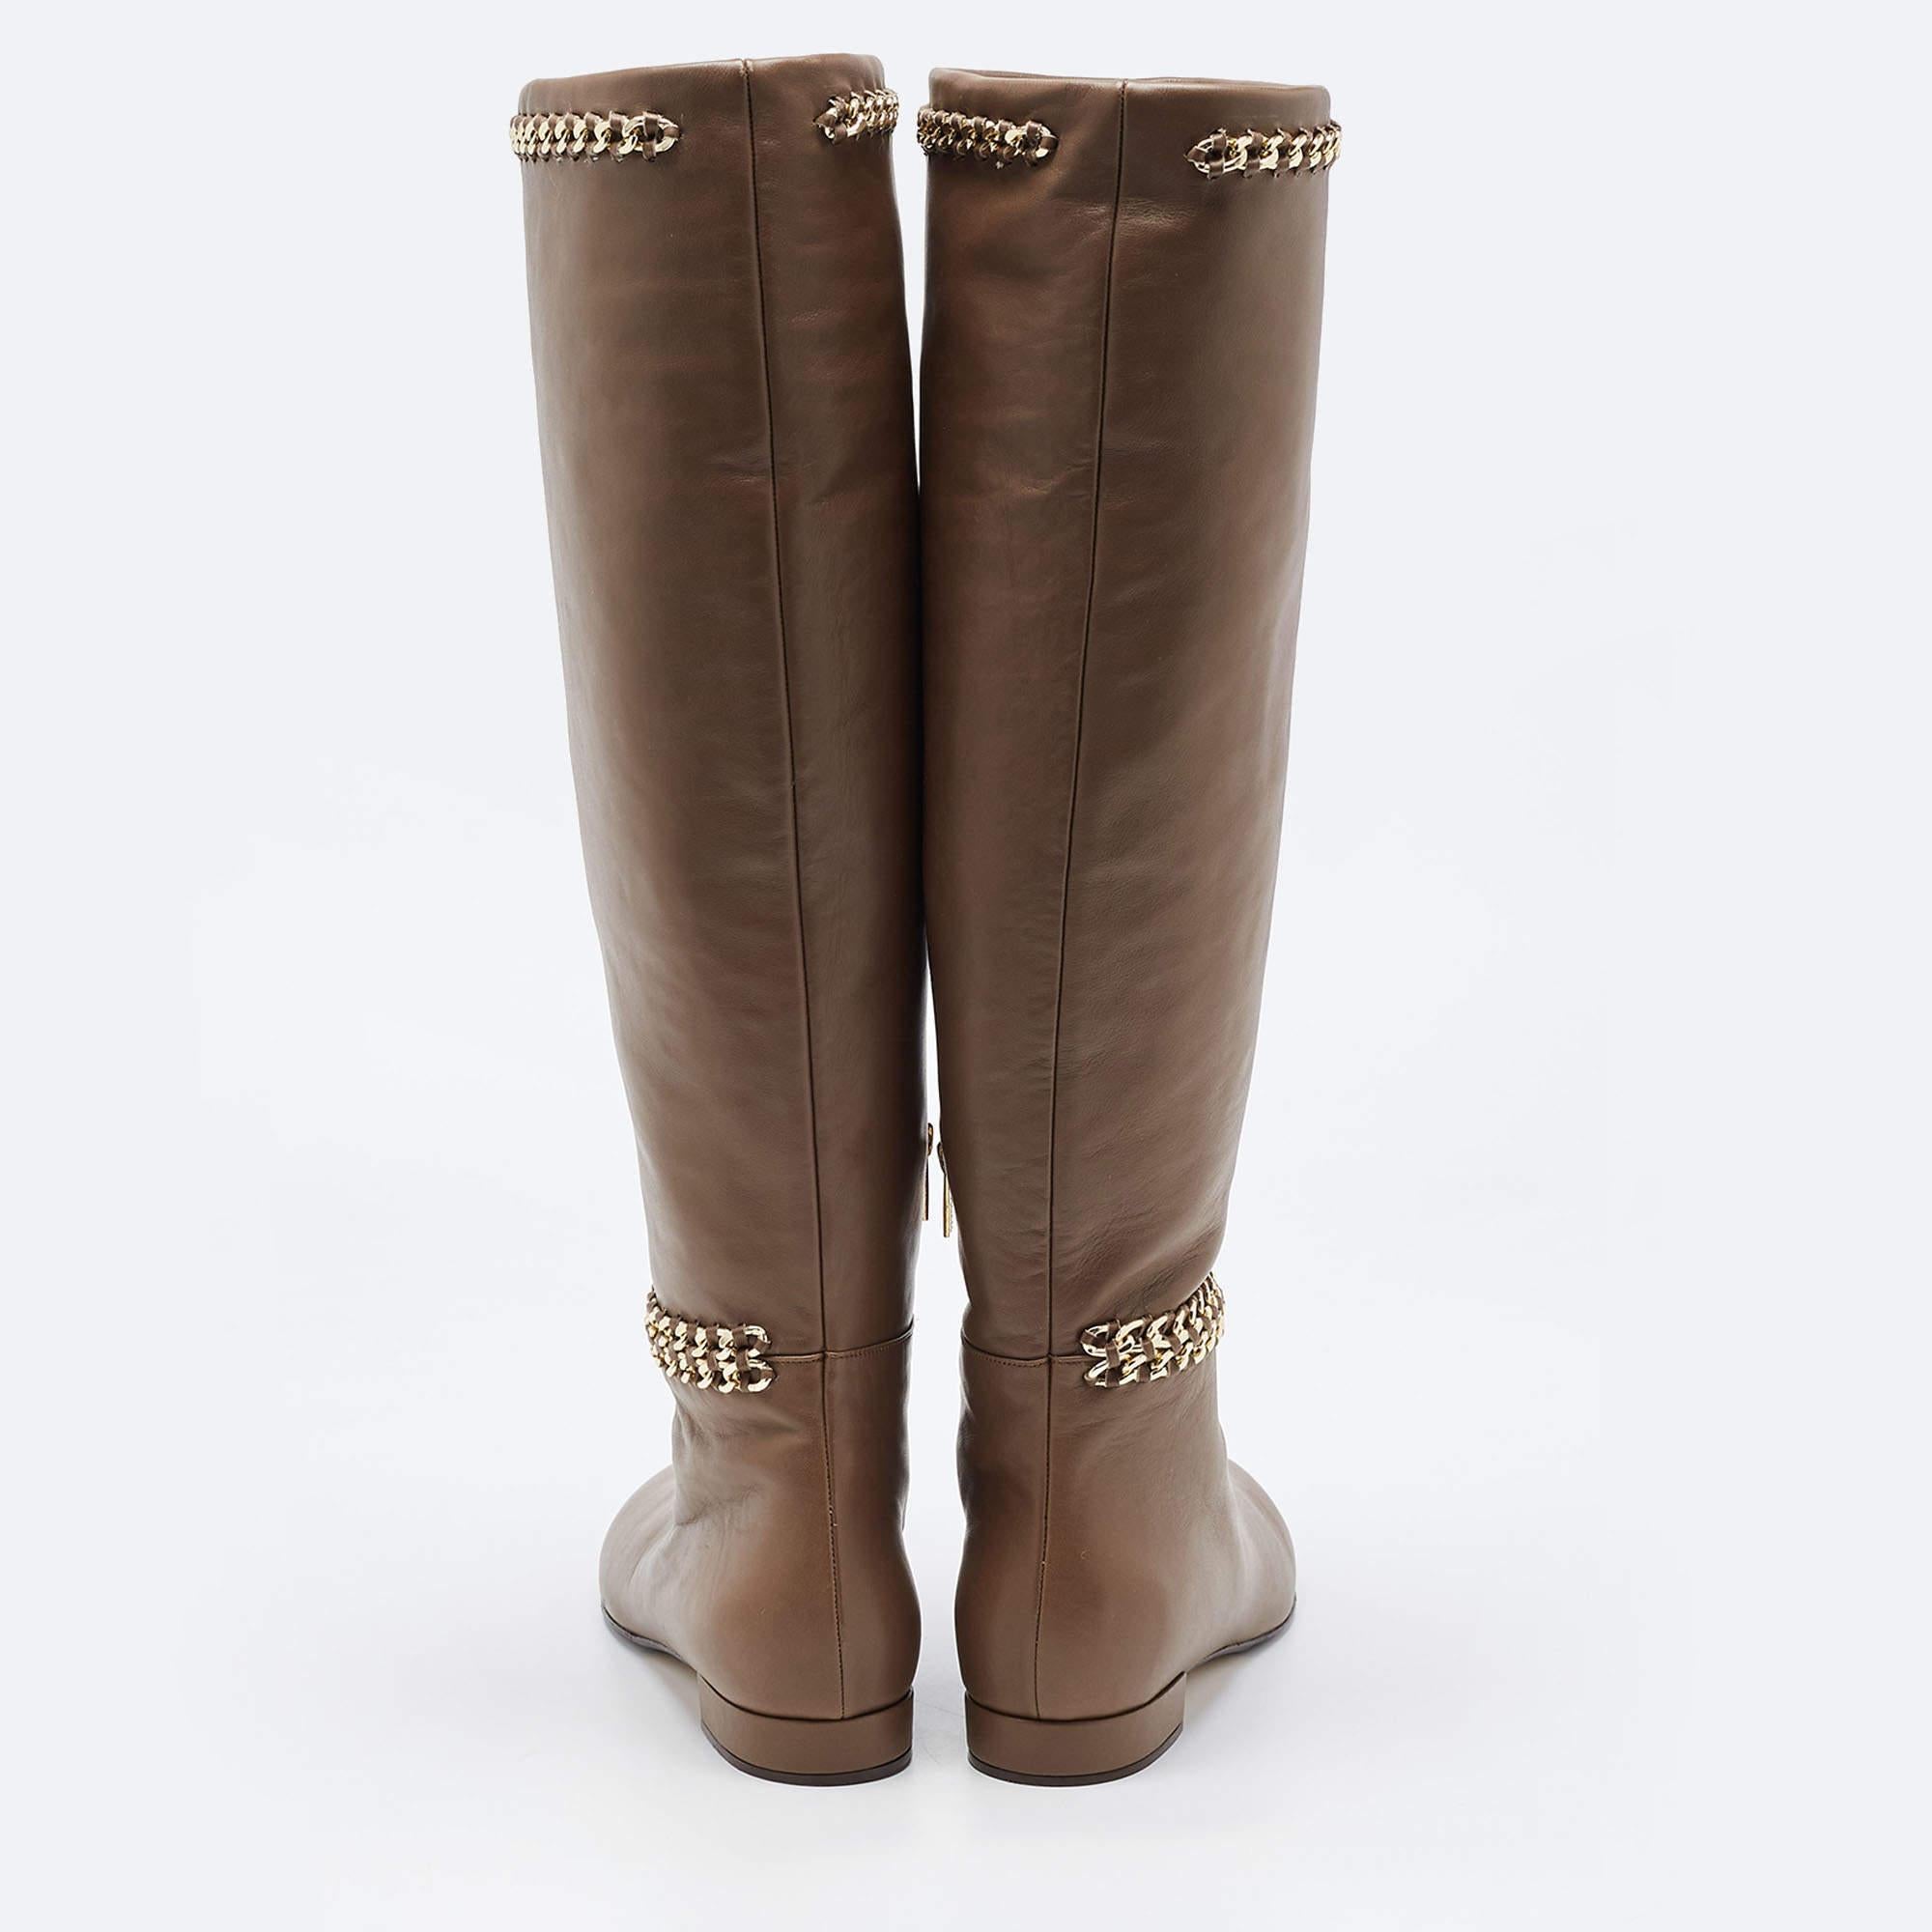 Le Silla Brown Leather Chain Detail Knee Length Boots Size 37 In Excellent Condition For Sale In Dubai, Al Qouz 2